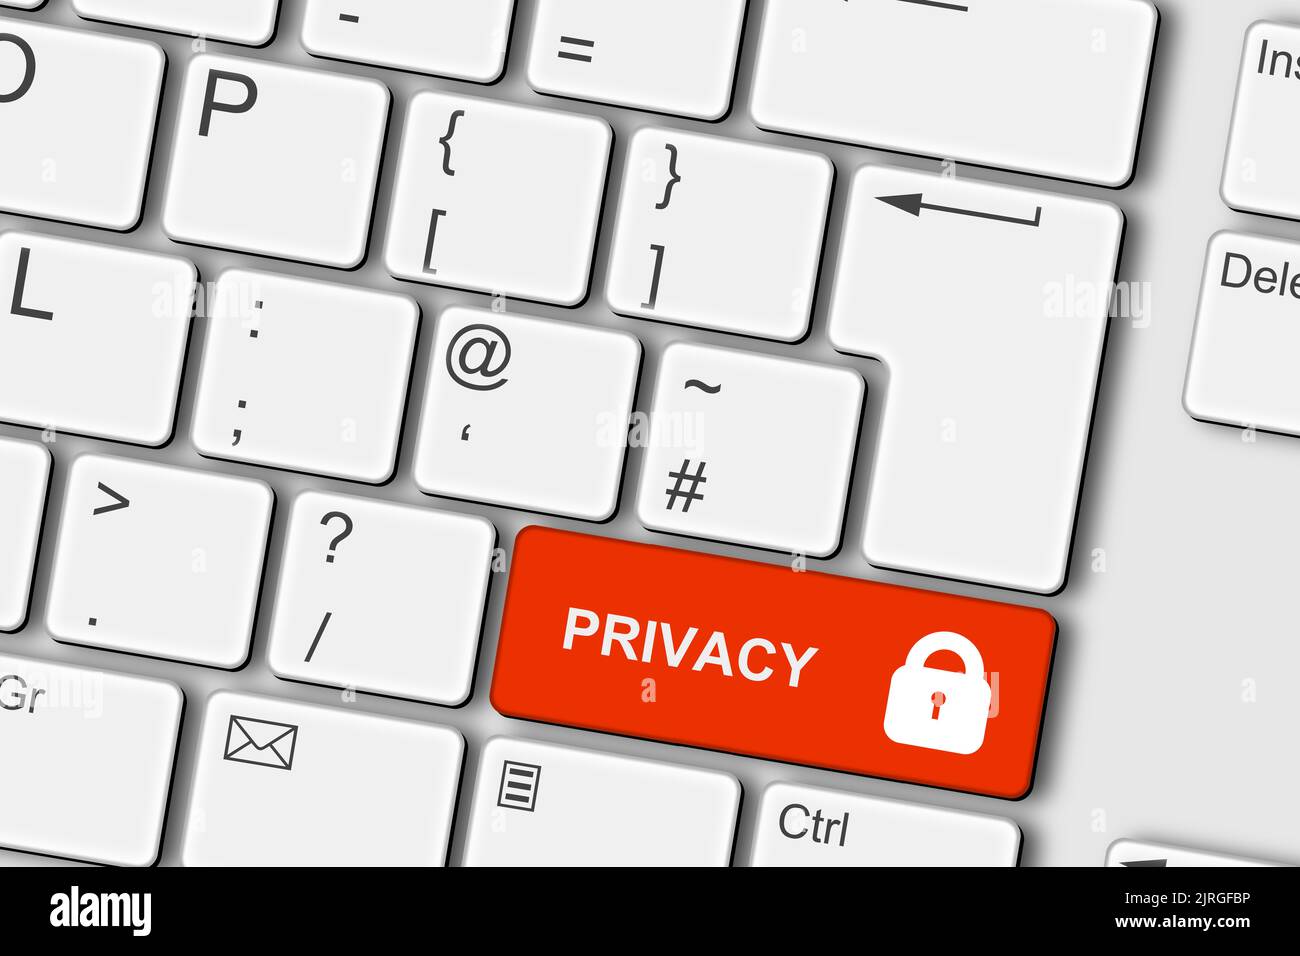 Privacy concept PC computer keyboard 3d illustration Stock Photo